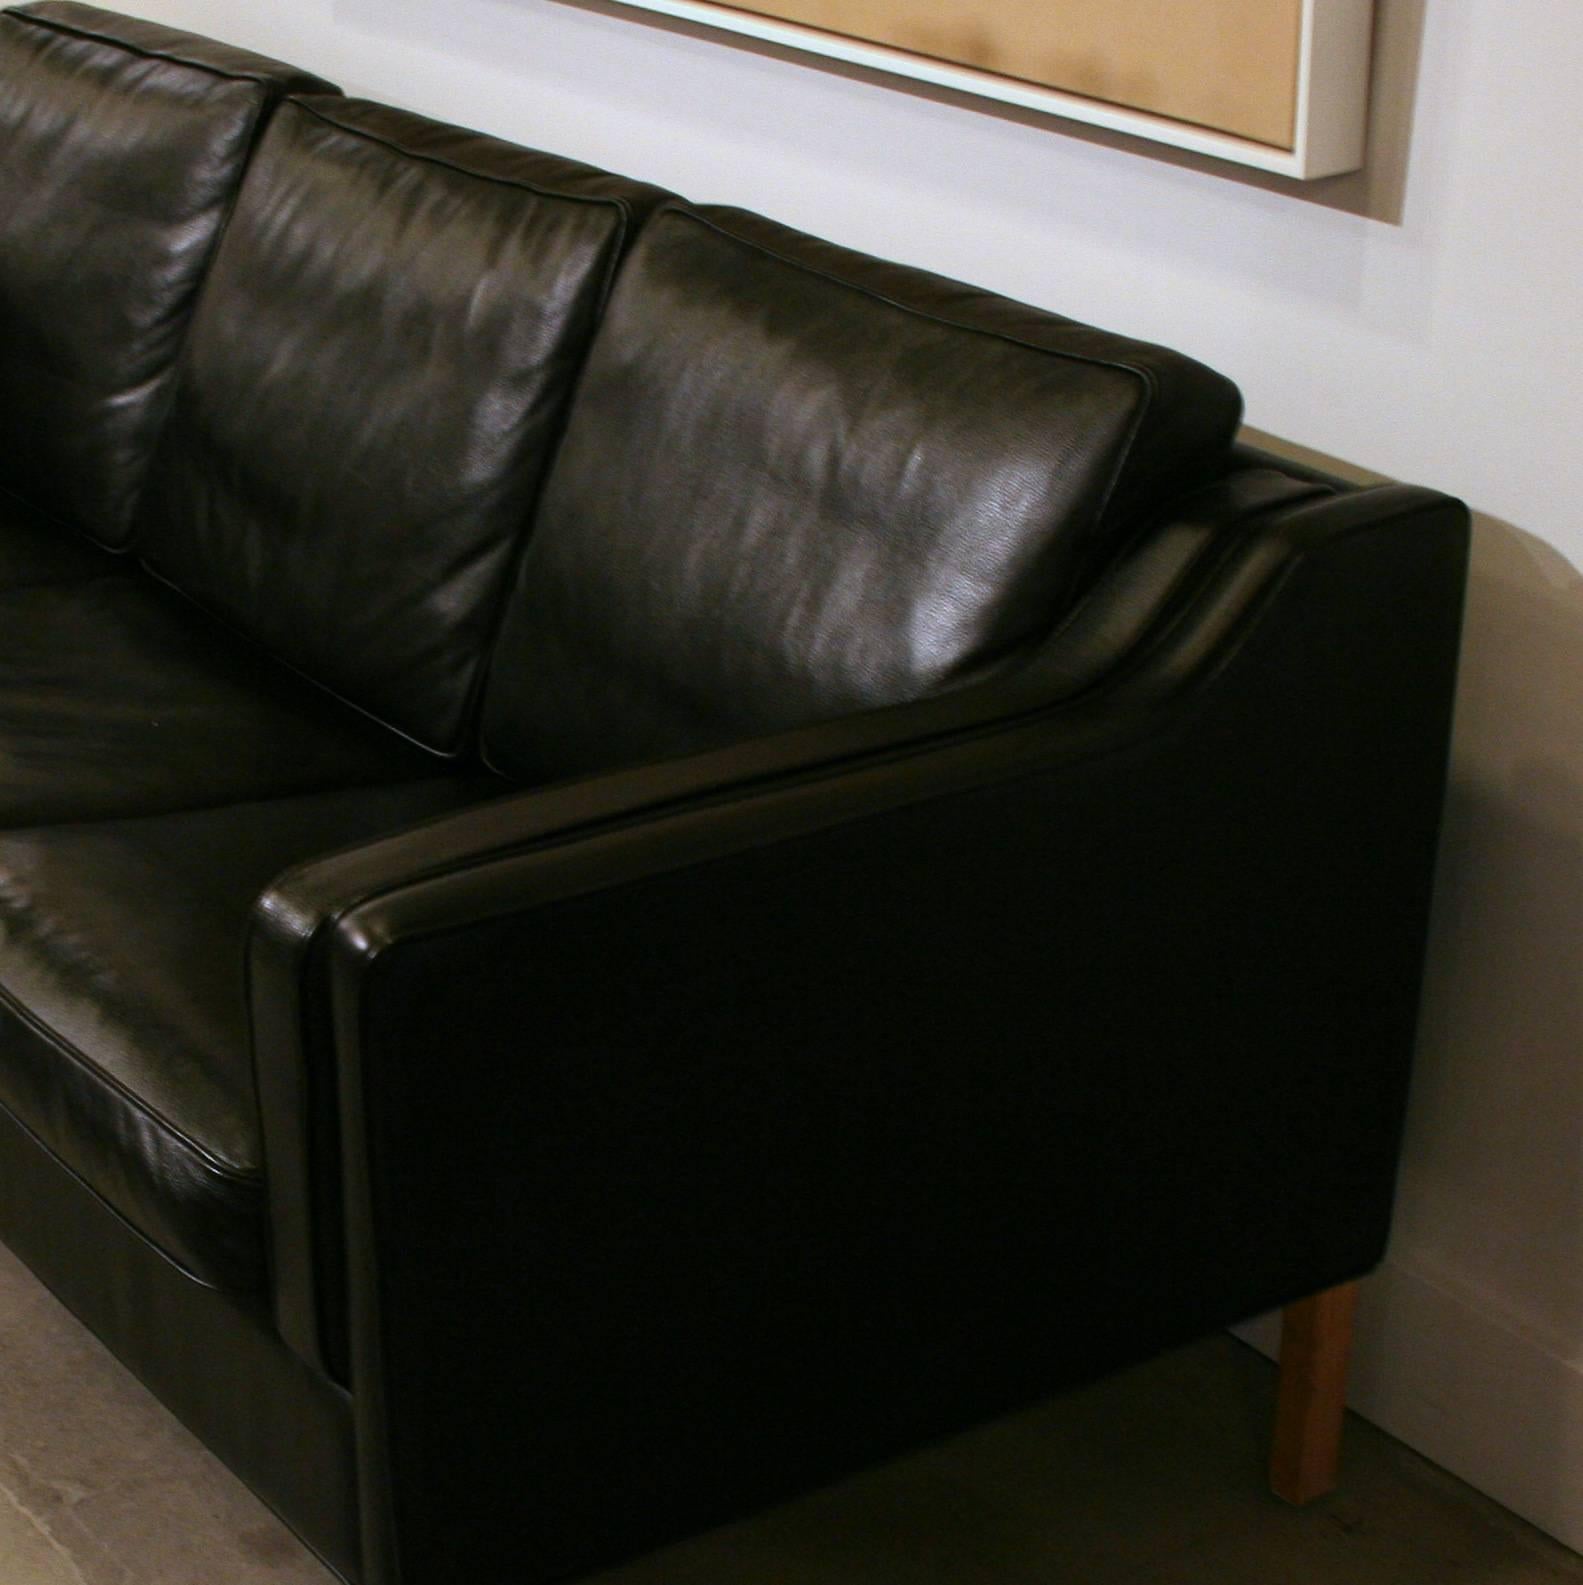 Supple full-grain black leather covers this sleek design modelled after the Classic Børge Mogensen sofa designs of the 1950s and 1960s. This vintage piece features the signature sloped arms with piping detail, and the loose cushions are filled with